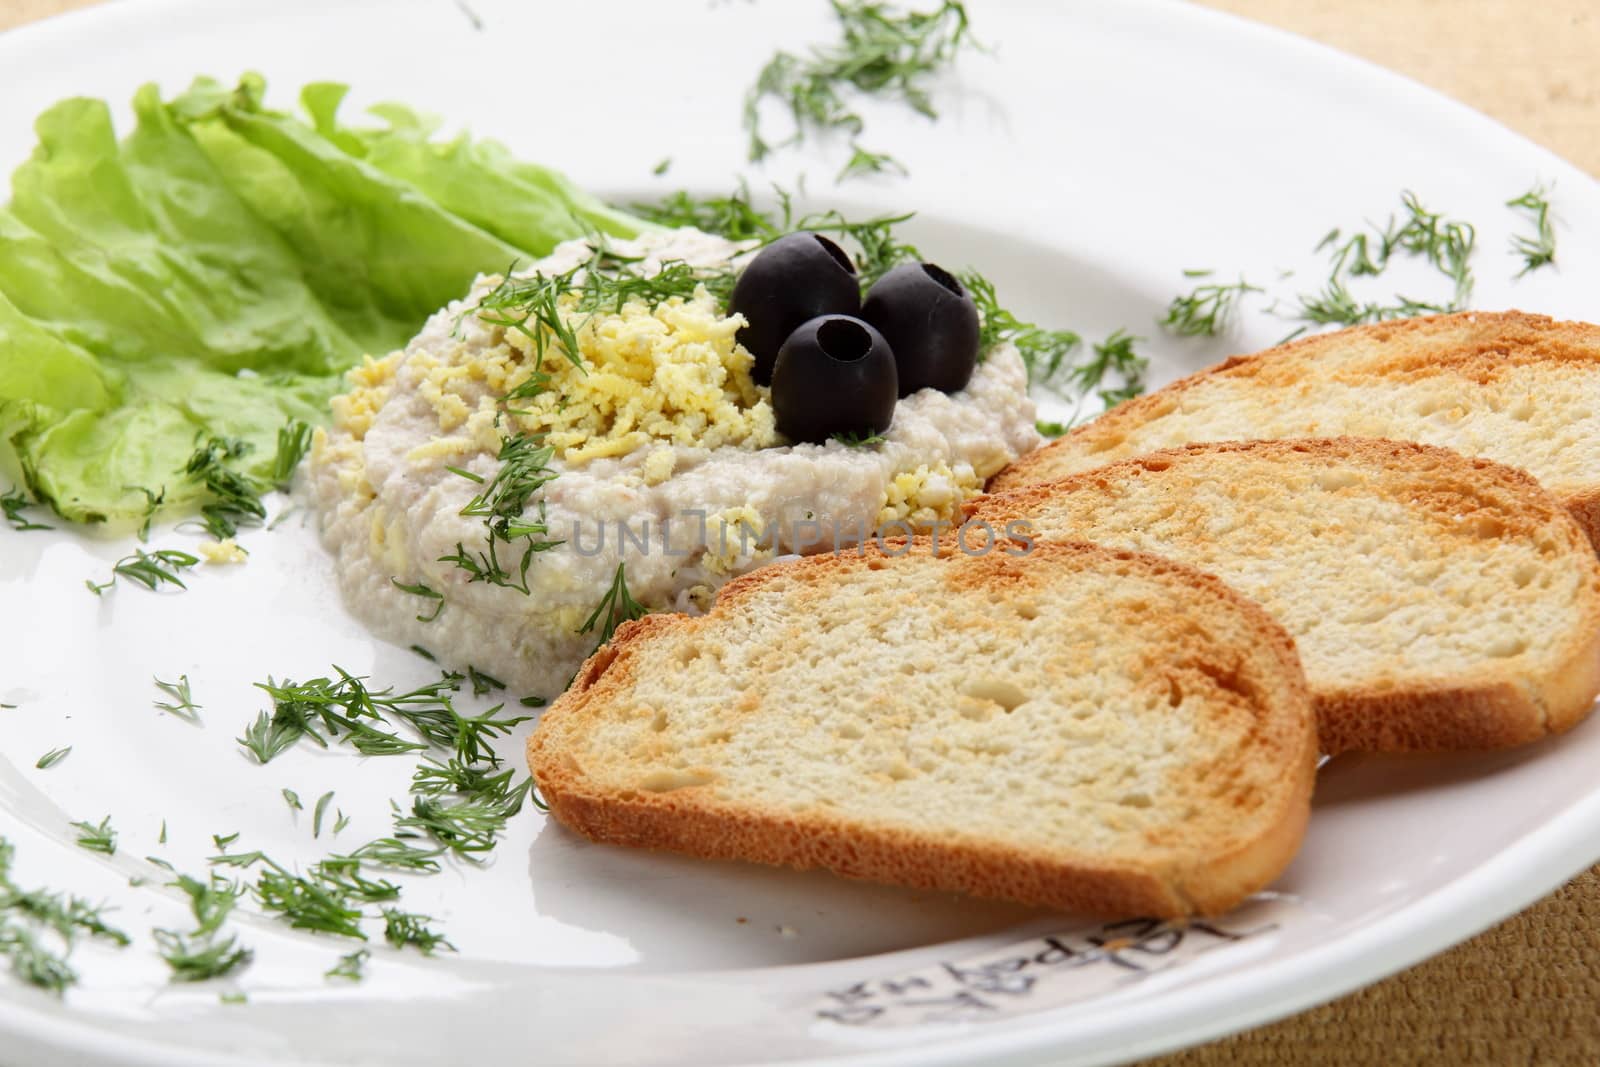 salad with bread by fiphoto